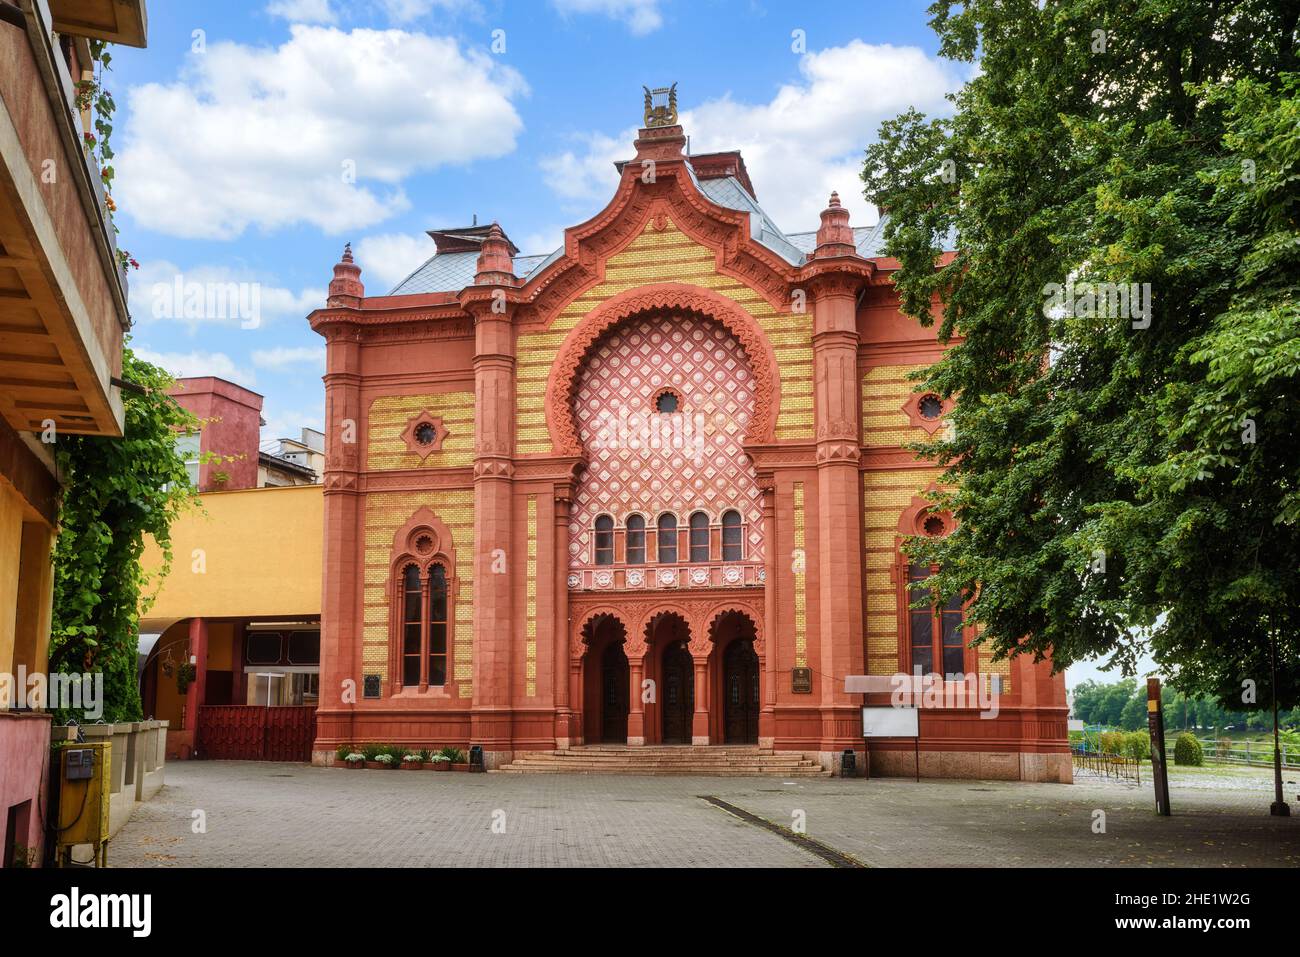 Old Synagogue building is one of the main landmarks in Uzhgorod Old town, west Ukraine Stock Photo